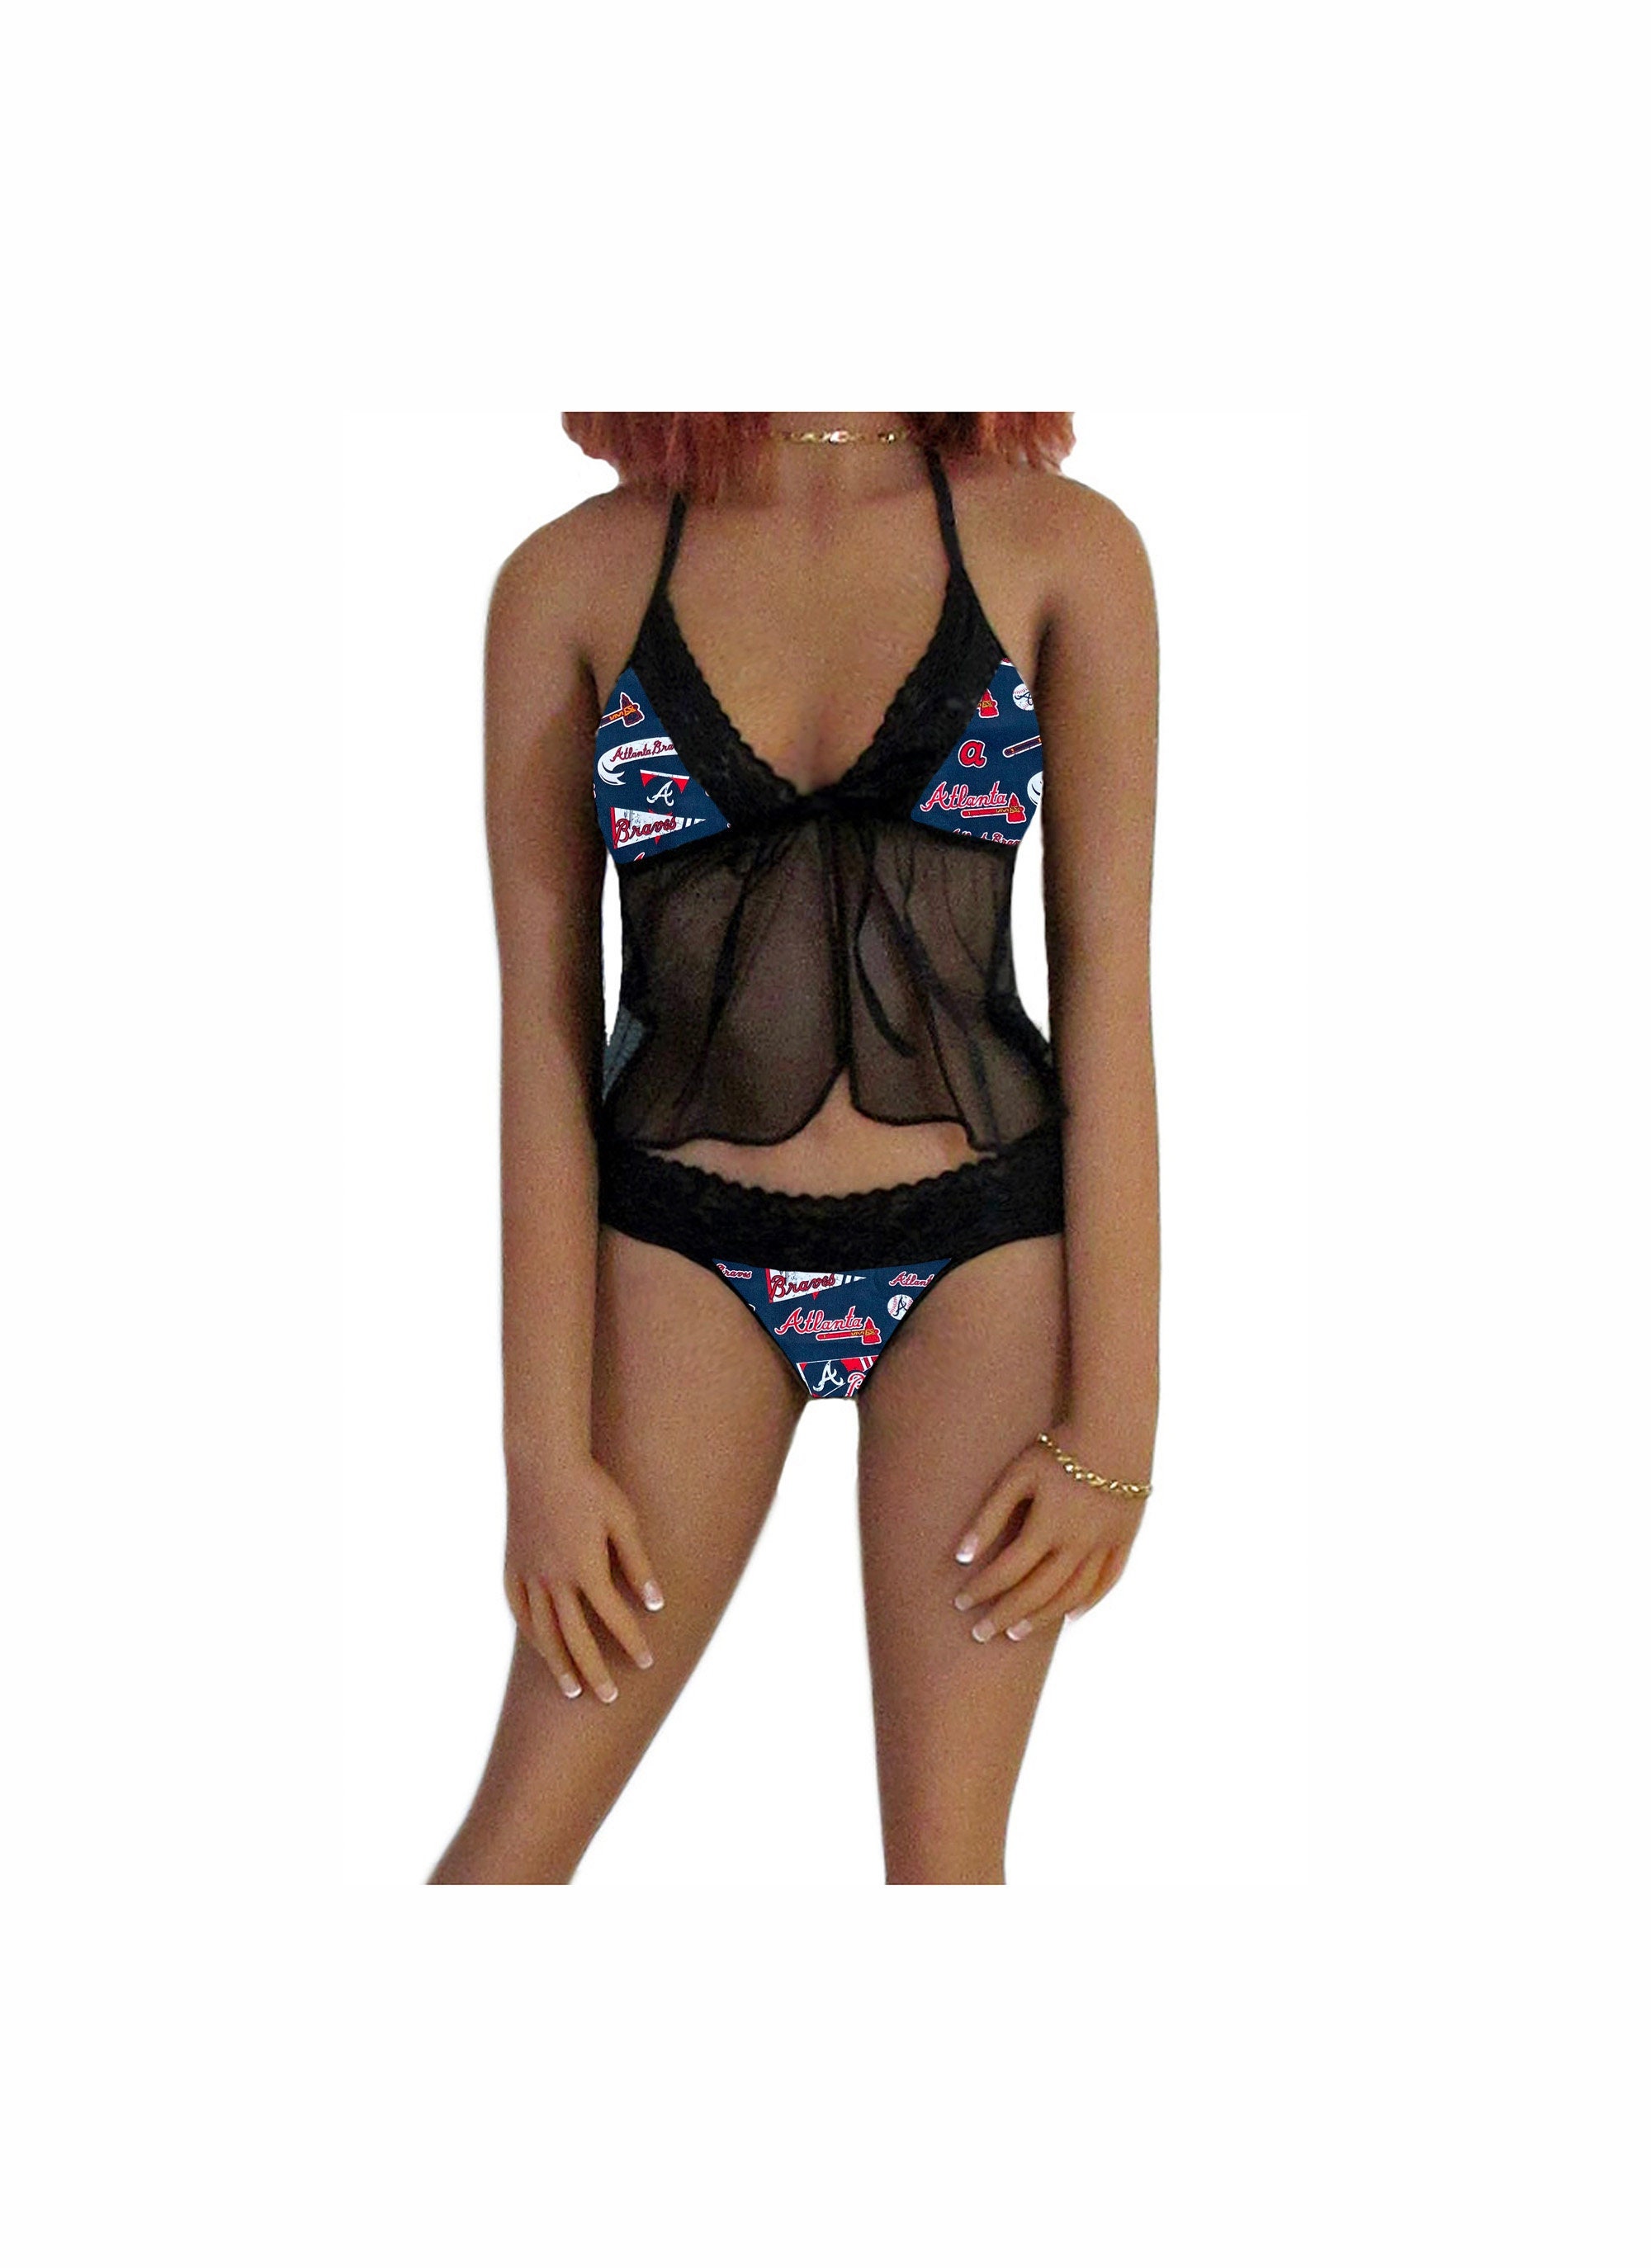 Atlanta Braves Lingerie Cami Top and String Thong Panty Set, X-small to  Large, Made to Order 